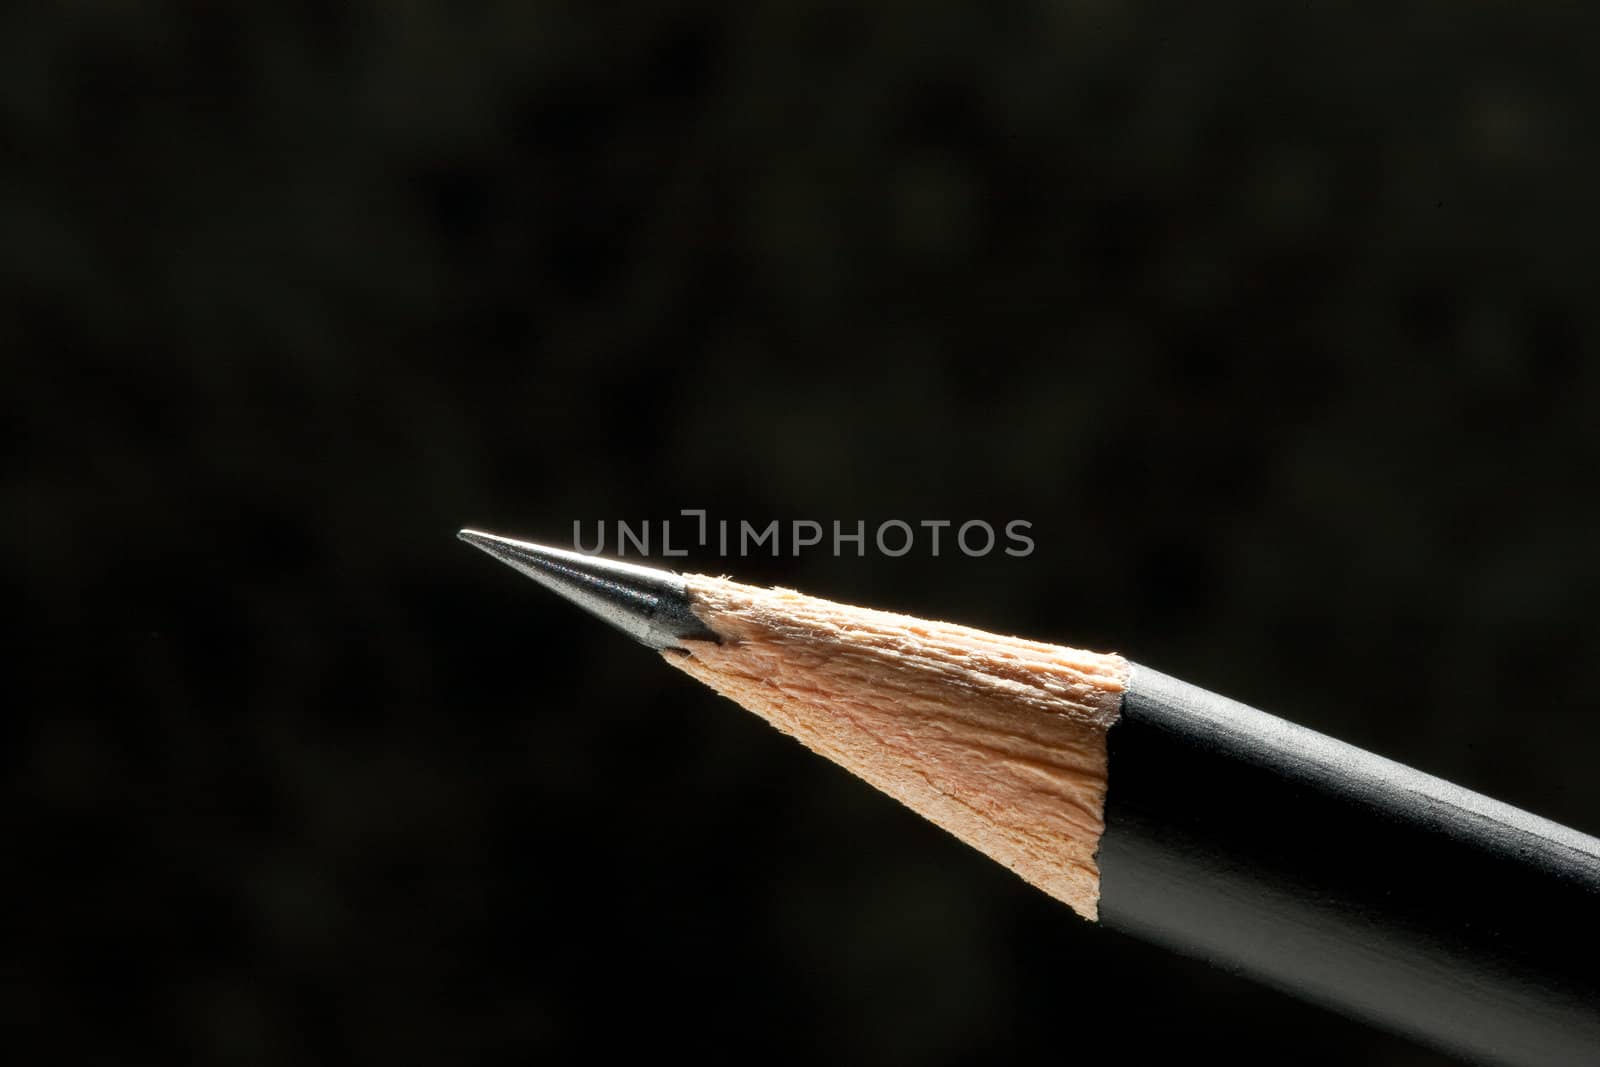 Close-up, studio, black pencil sharpened edge, is well defined on a black background